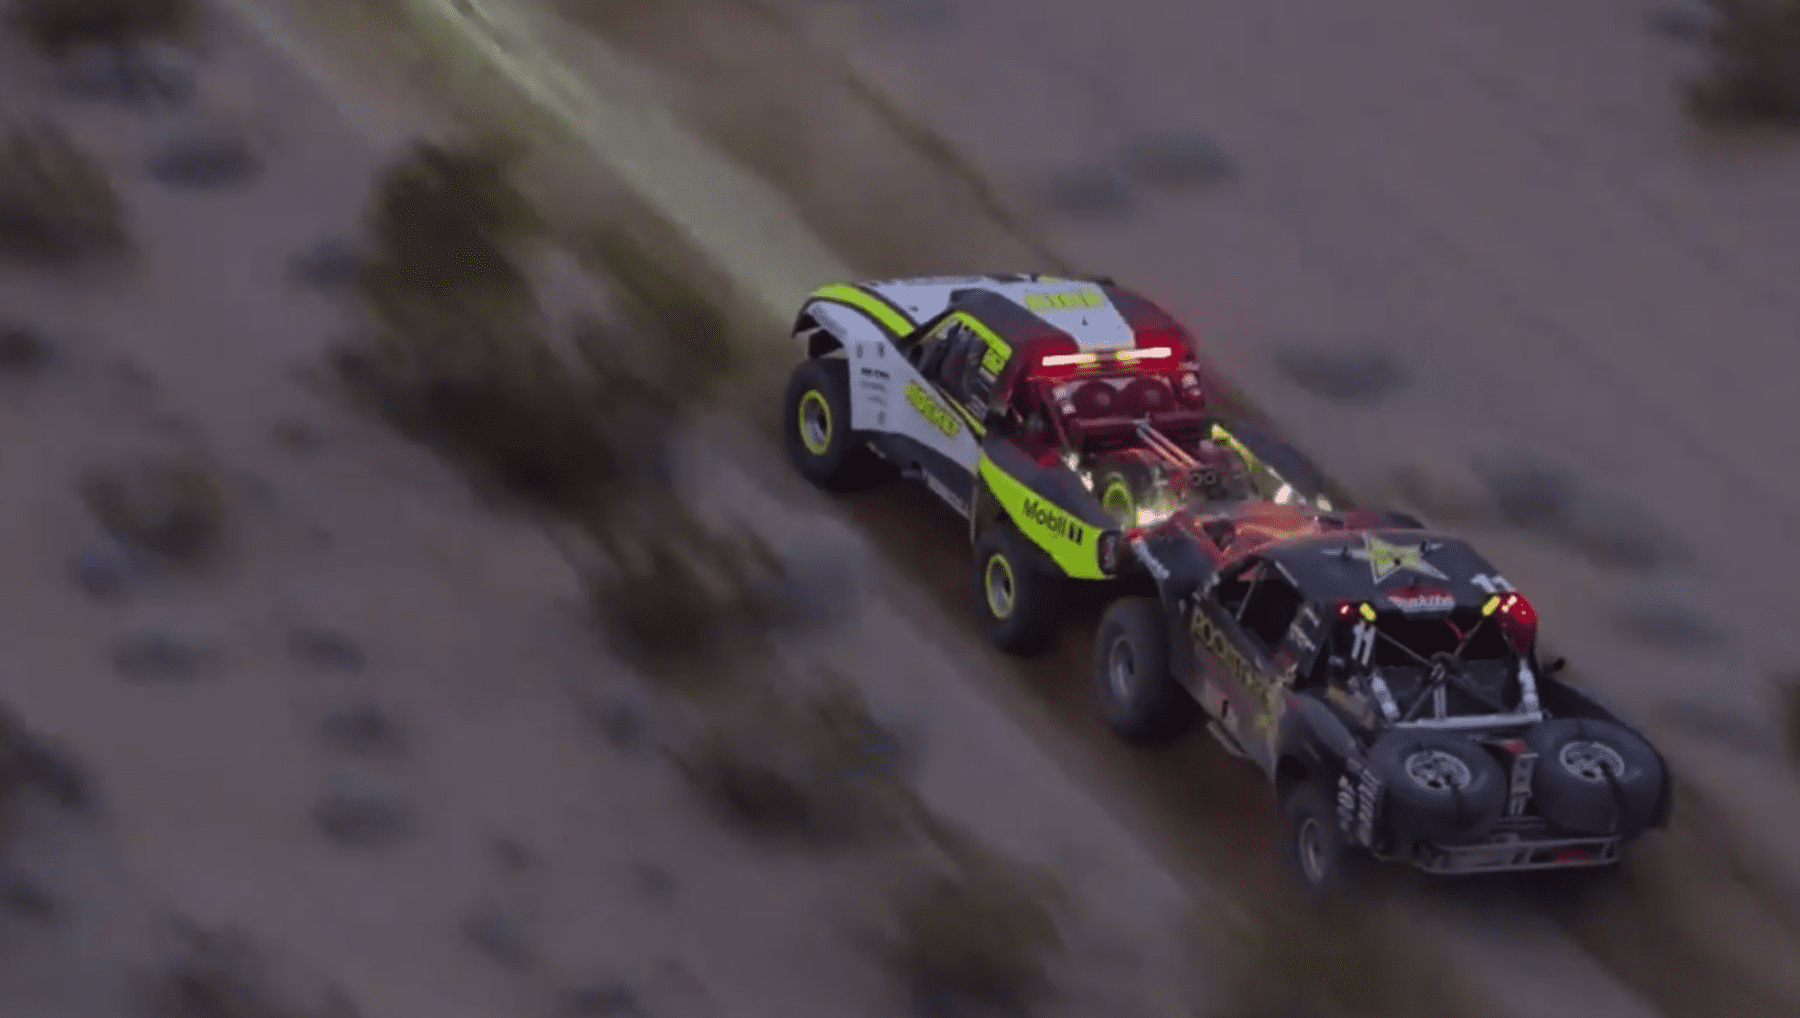 Jenson Button gets nerfed at the Mint 400